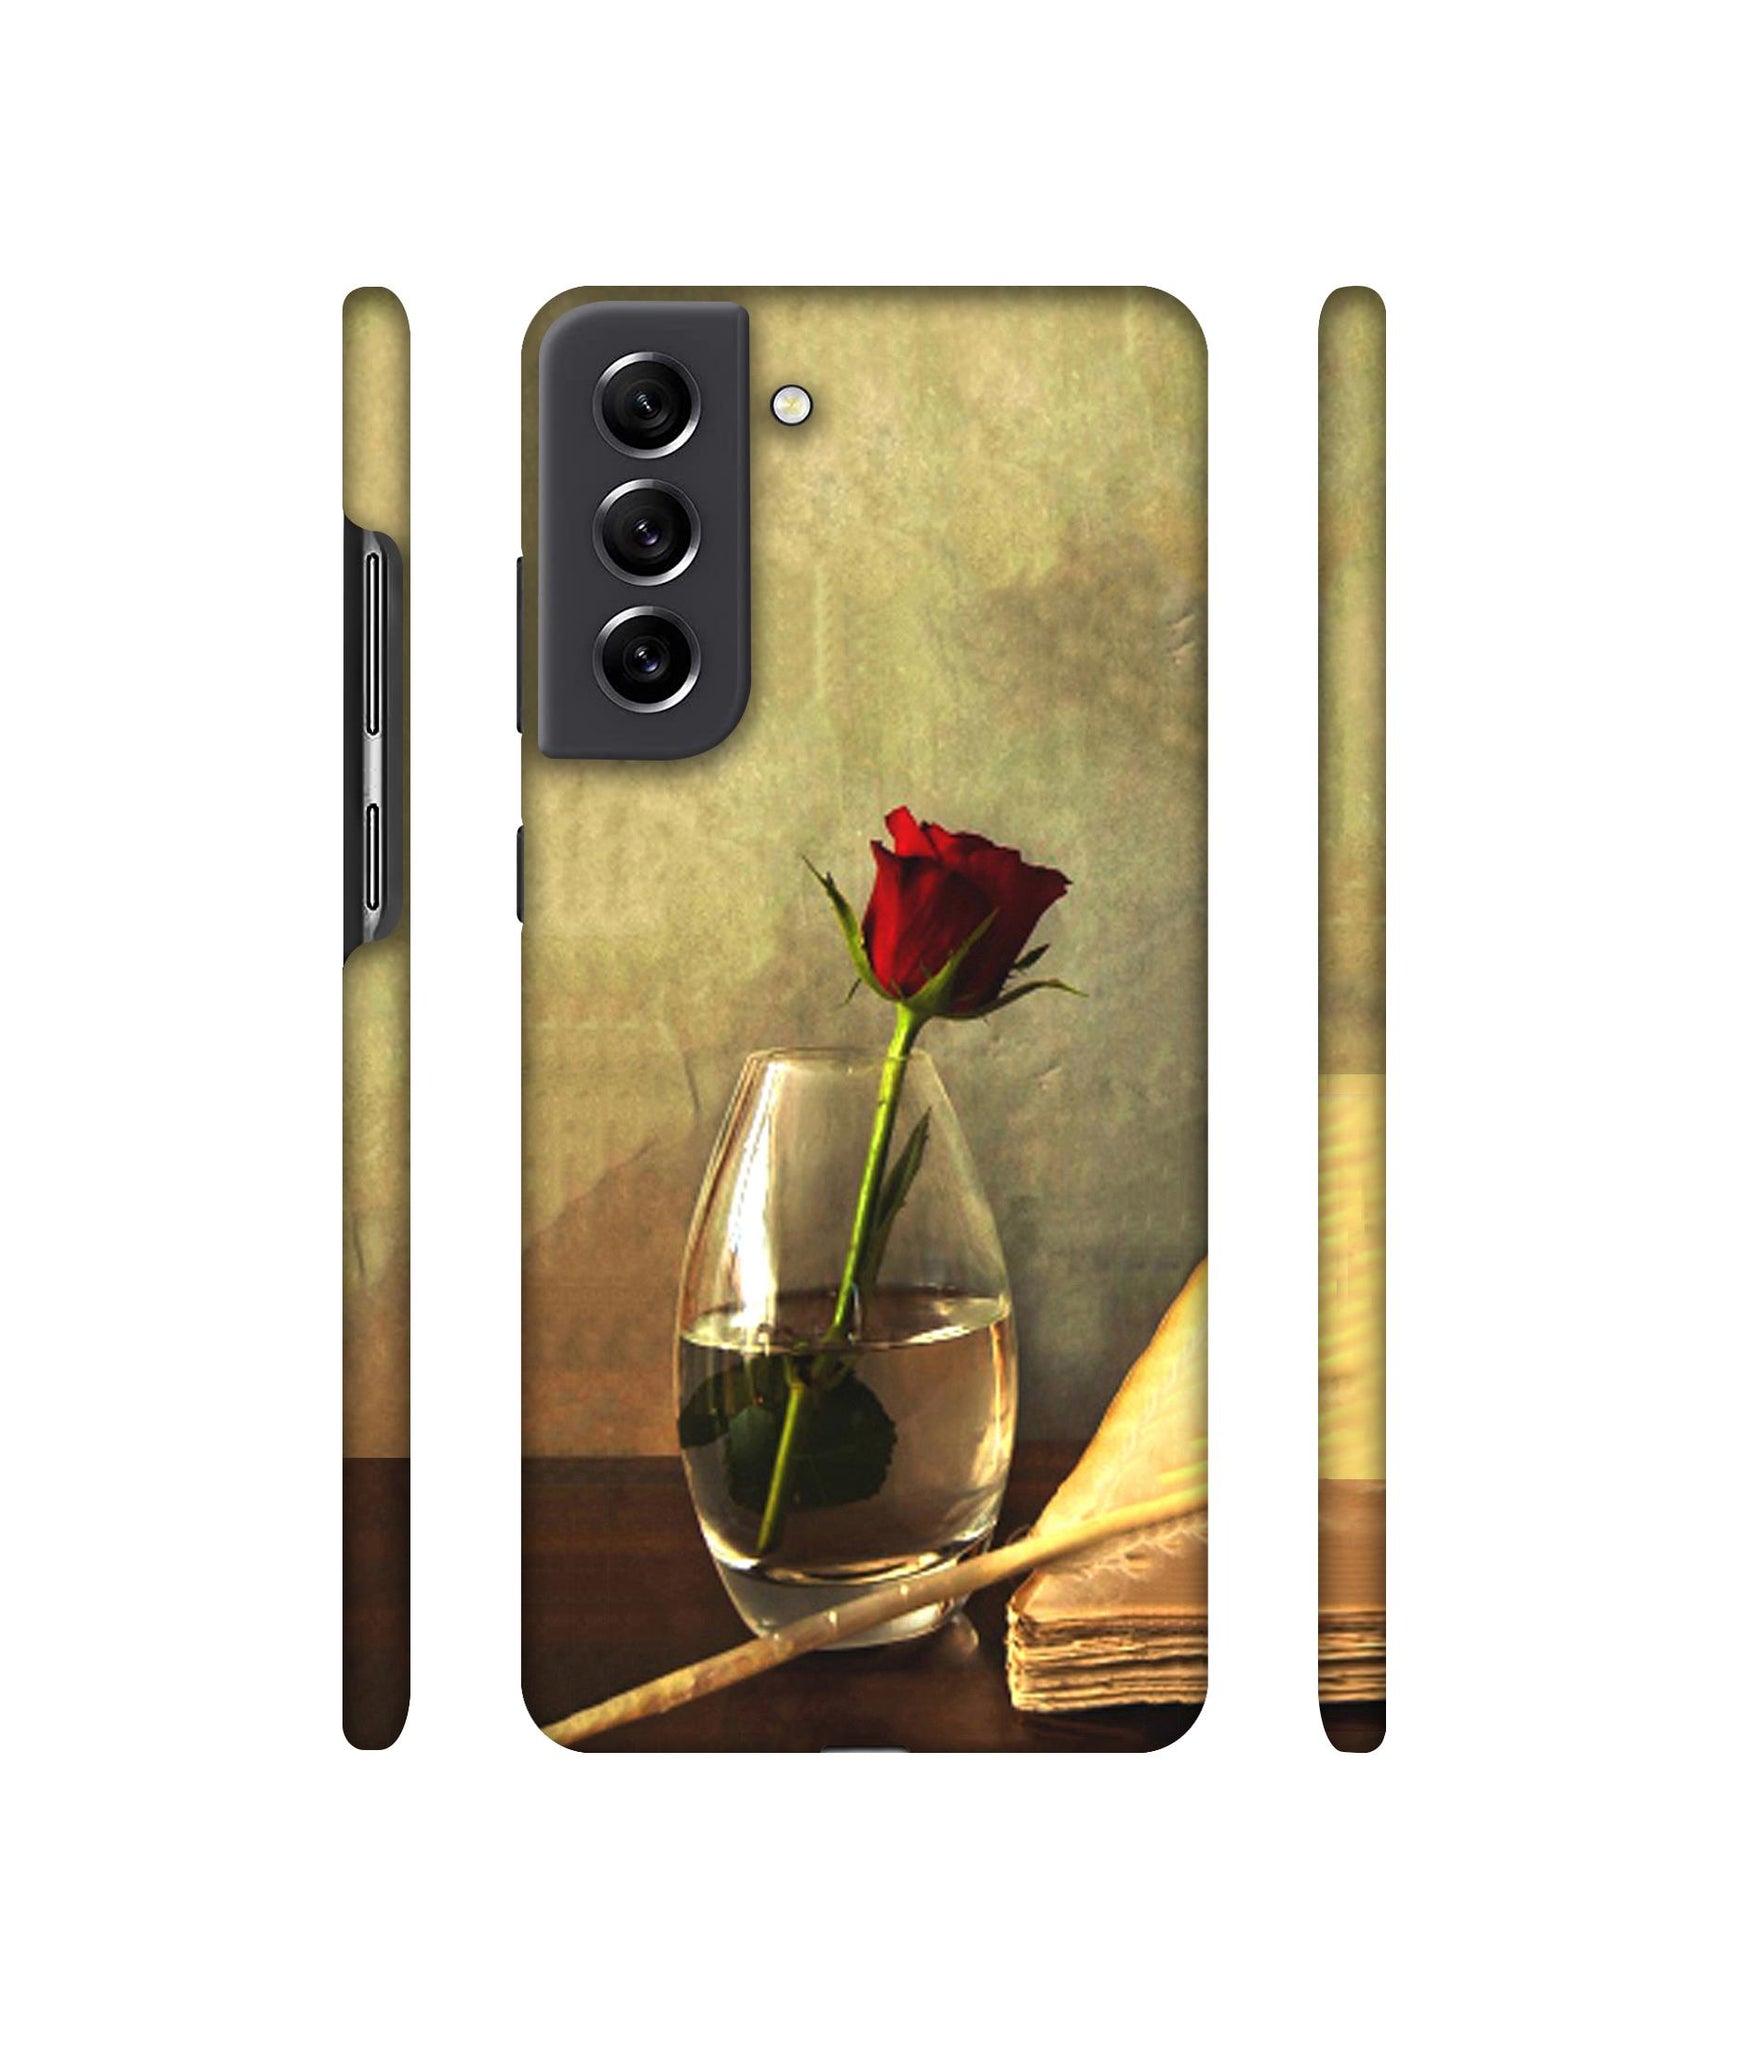 Red Rose in Glass Designer Hard Back Cover for Samsung Galaxy S21 FE 5G